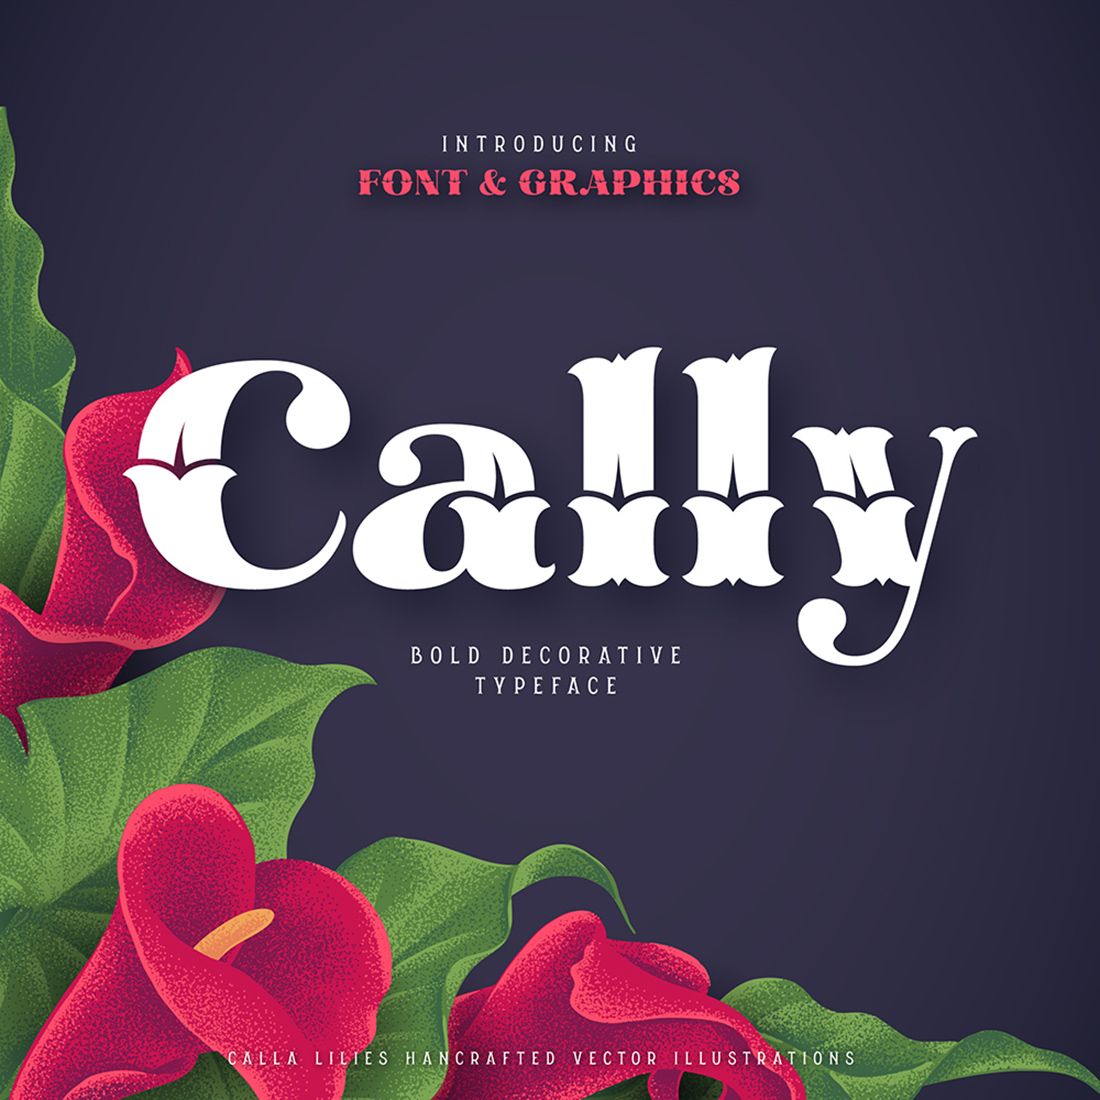 Cally Font & Graphics cover image.